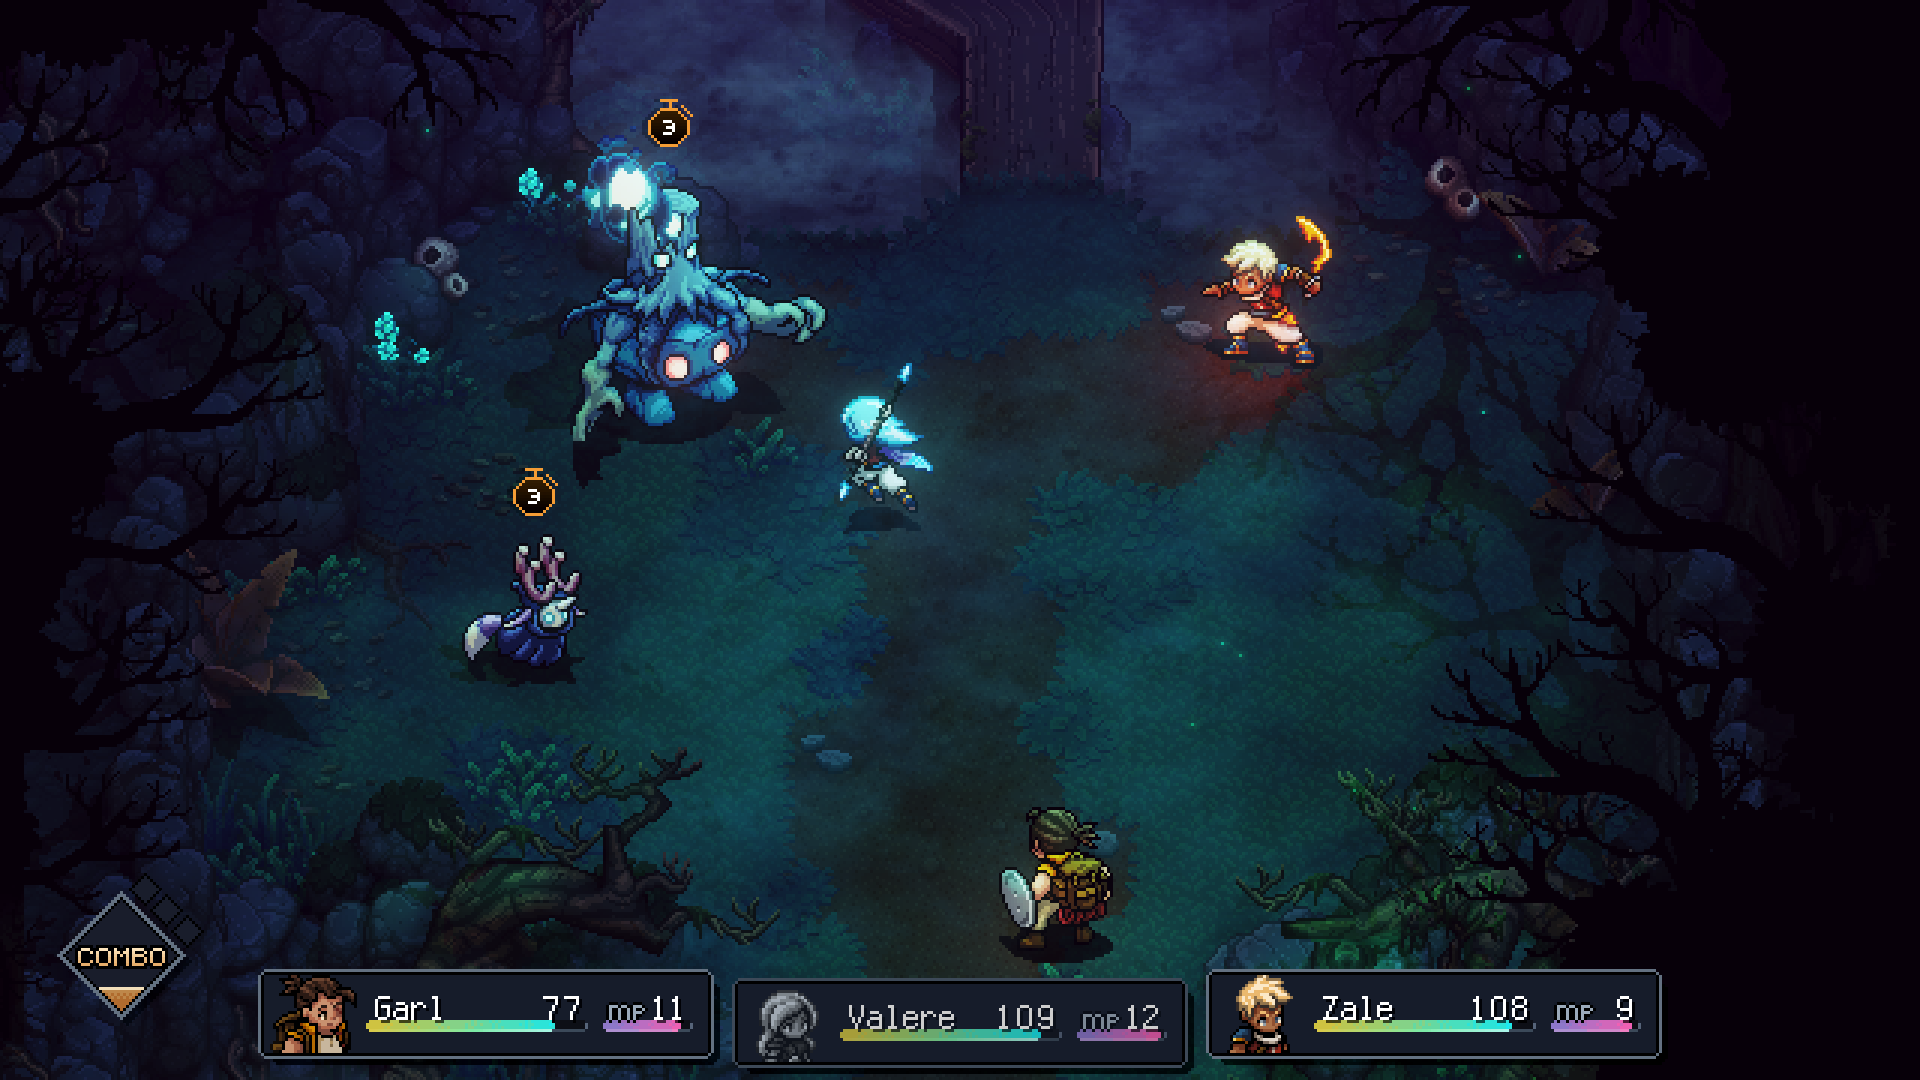 Sea Of Stars Shares 19 Minutes Of New Gameplay Footage - Noisy Pixel